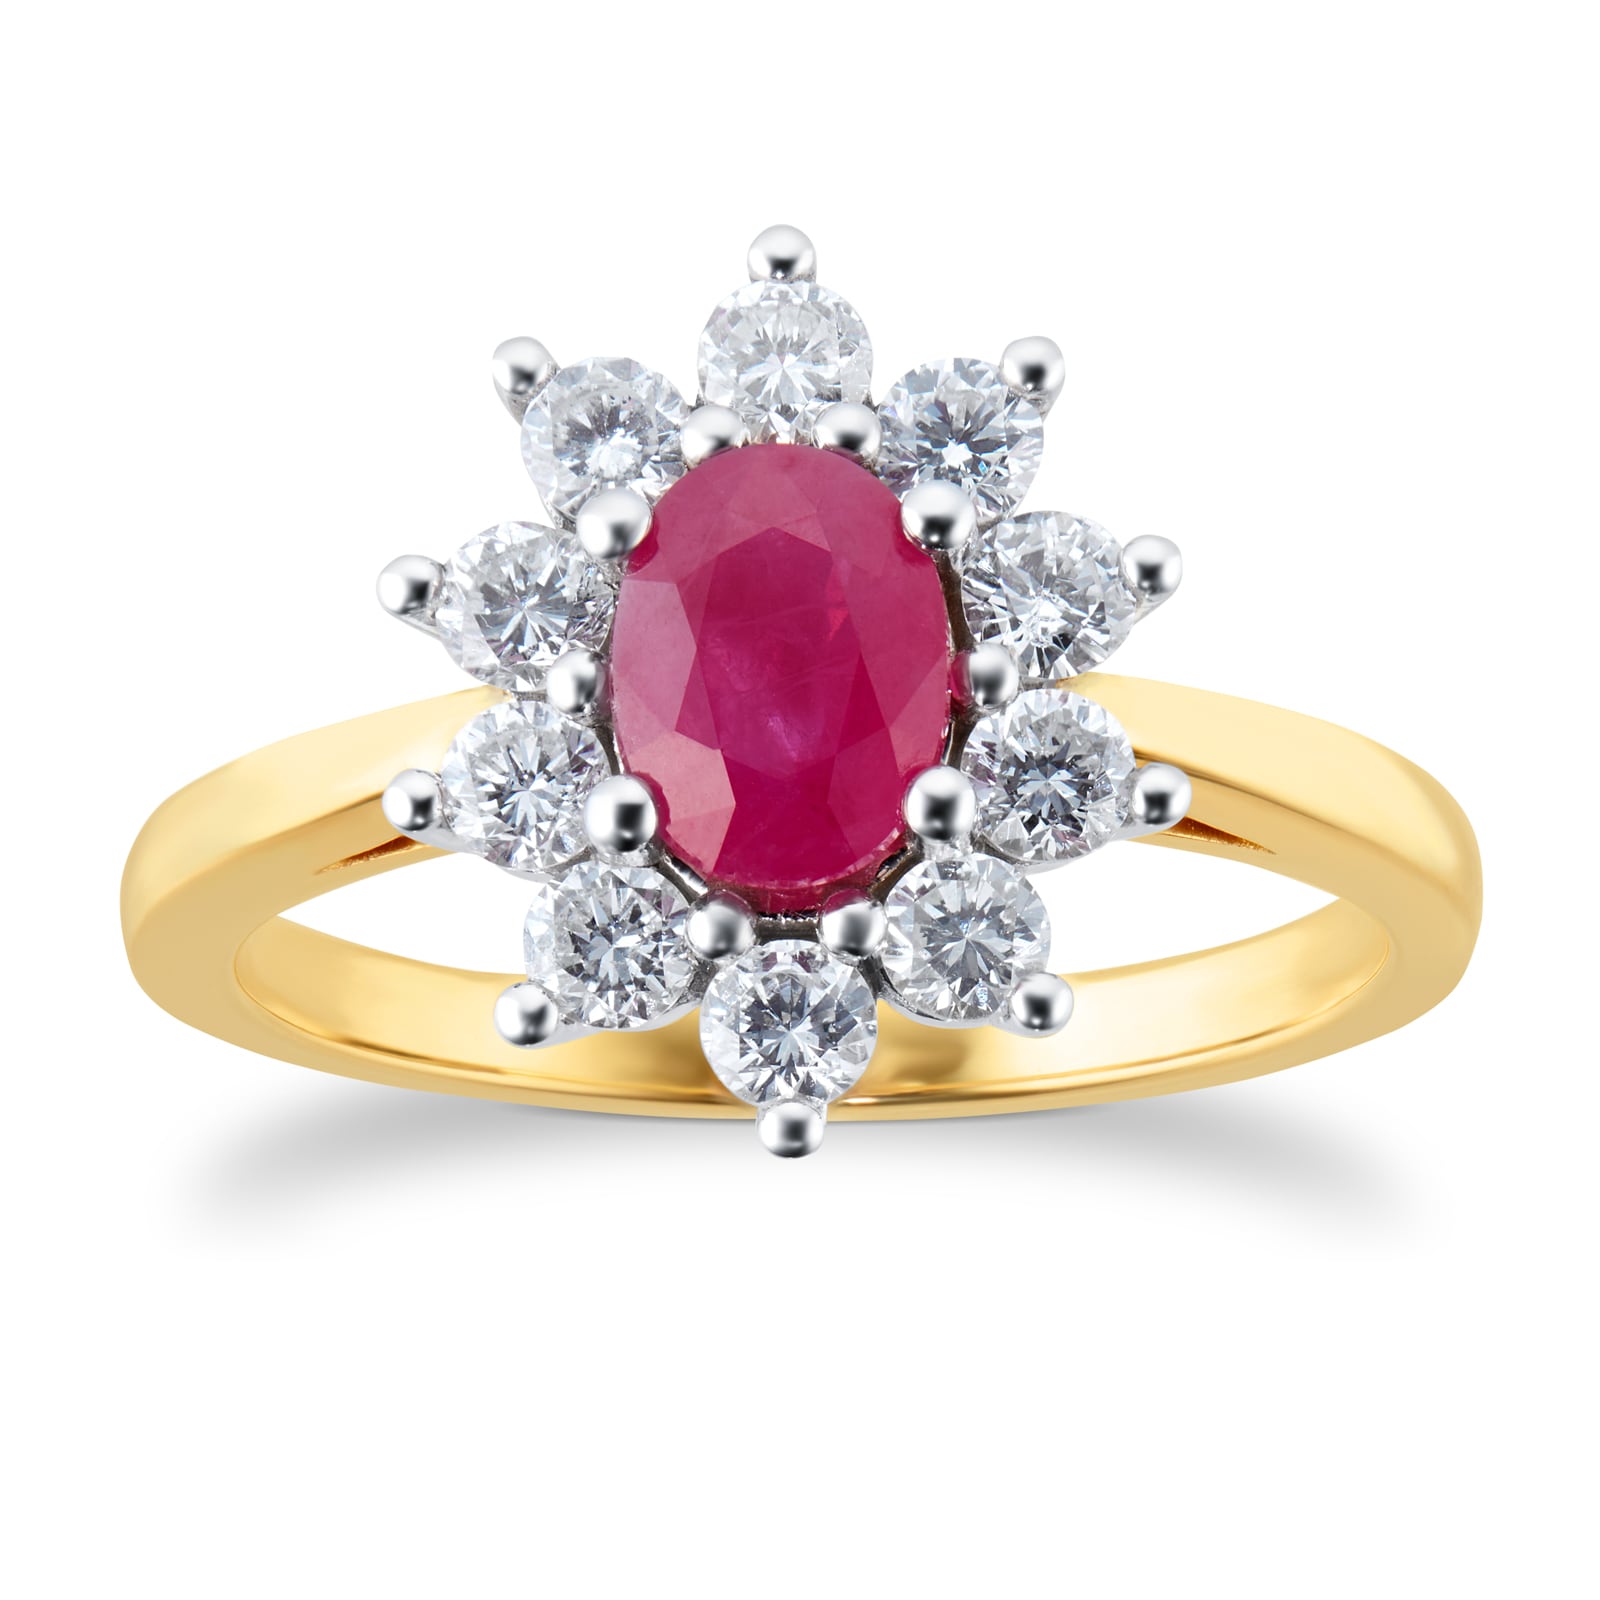 18ct Yellow and White Gold Ruby And Diamond Cluster Ring - Ring Size J.5